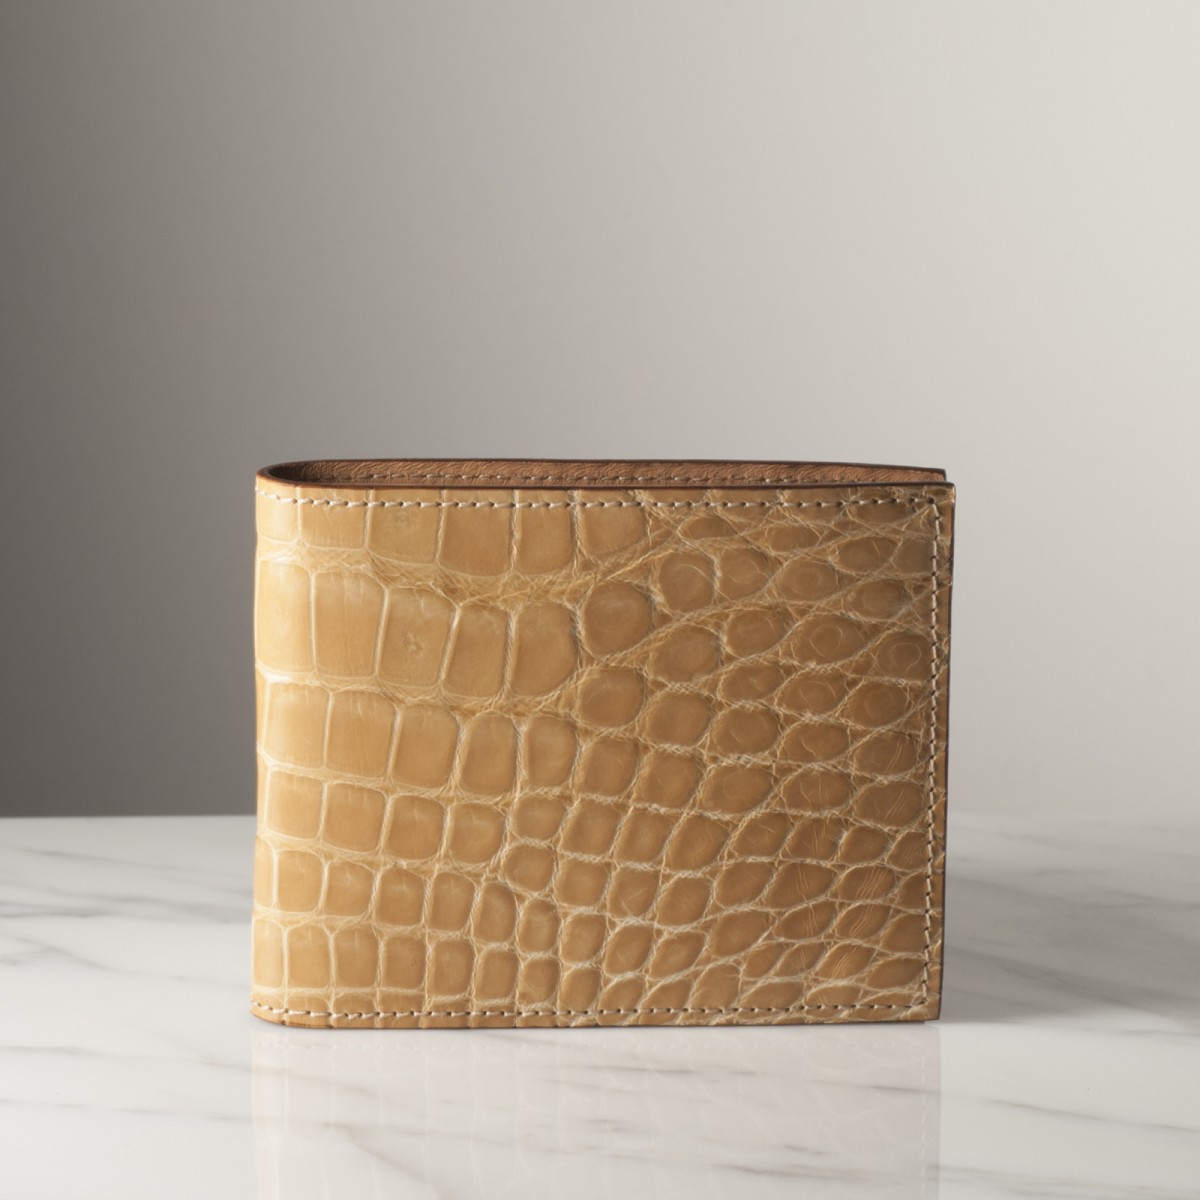 POLO - Crocodile leather wallet, handmade in Italy